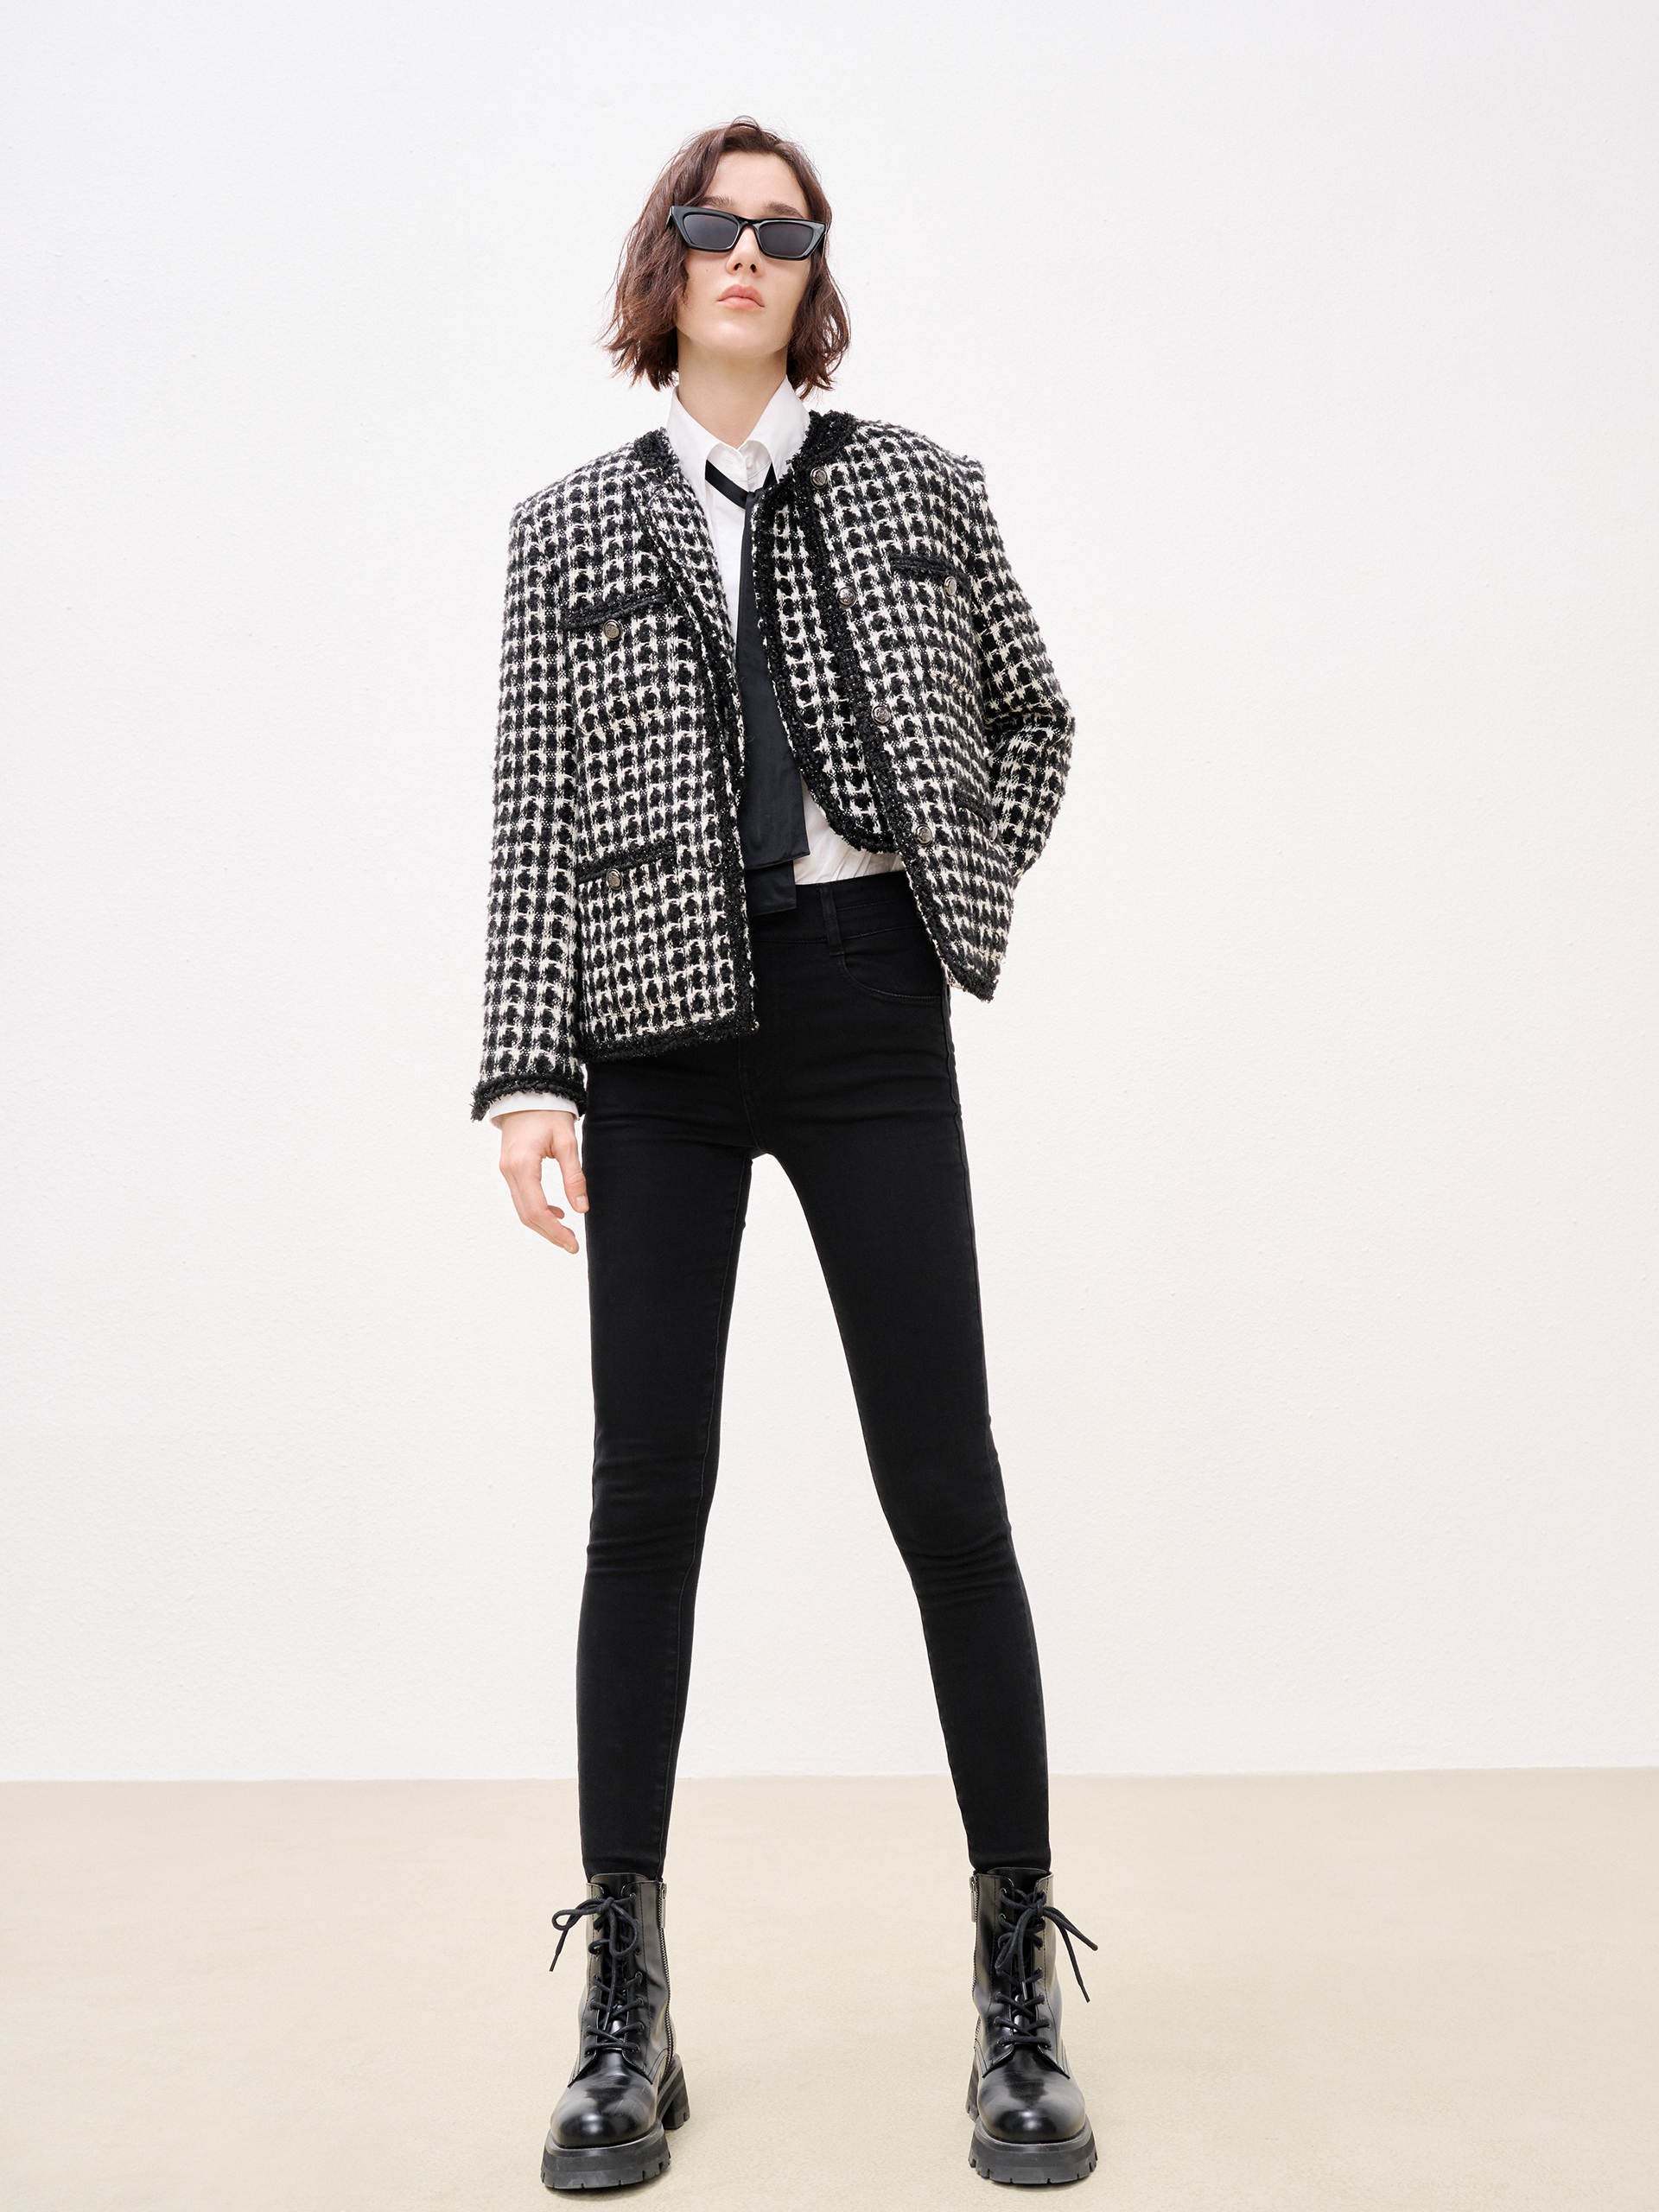 The 28 Best Tweed Jackets and Blazers for Women